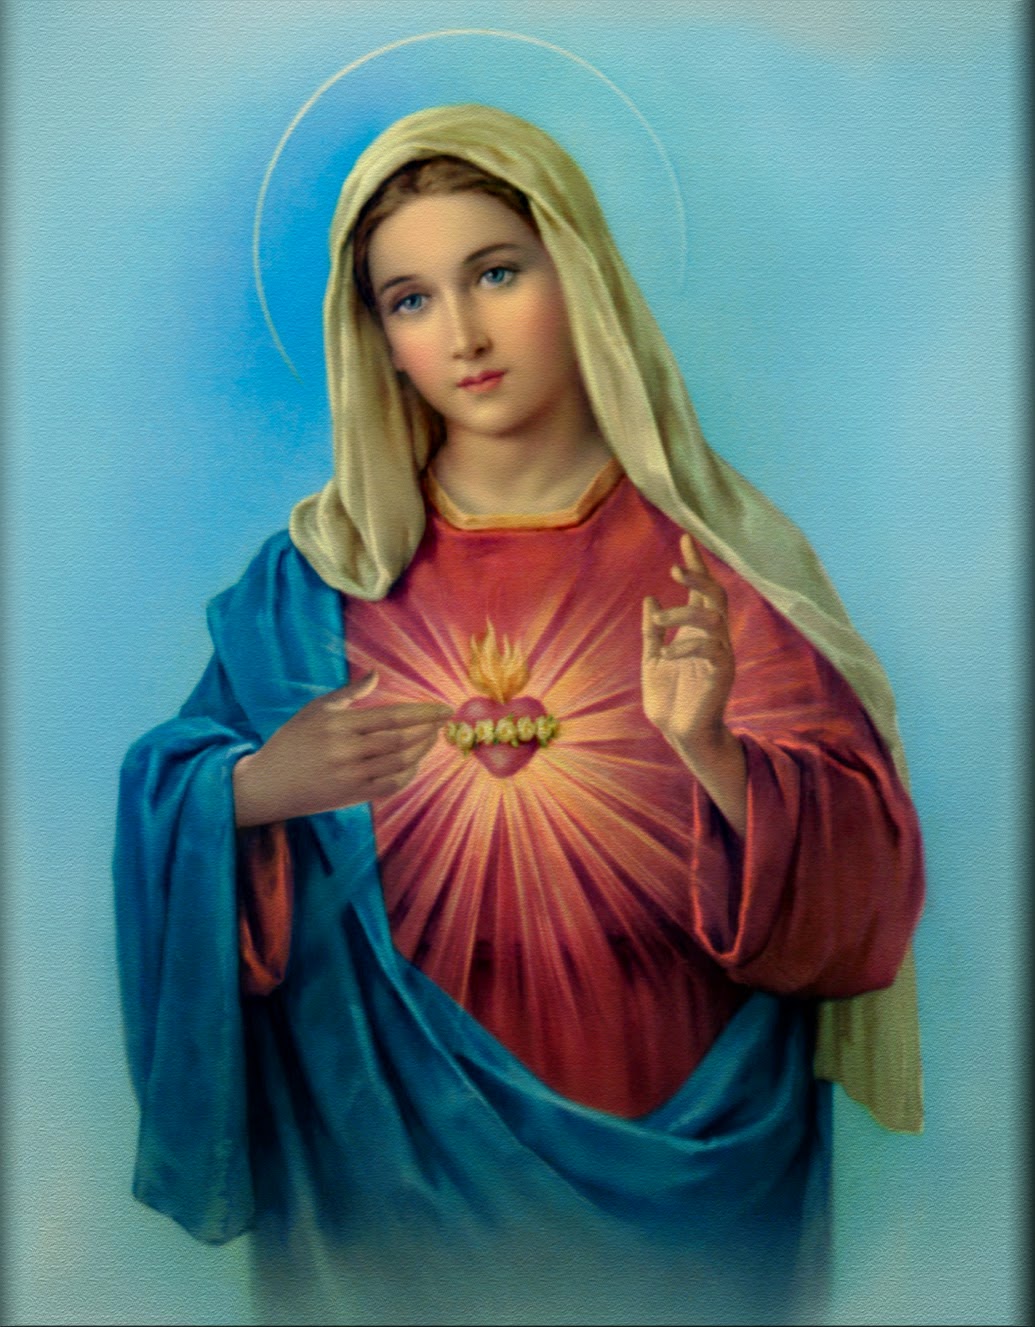 Prayer to Our Lady of Evangelization